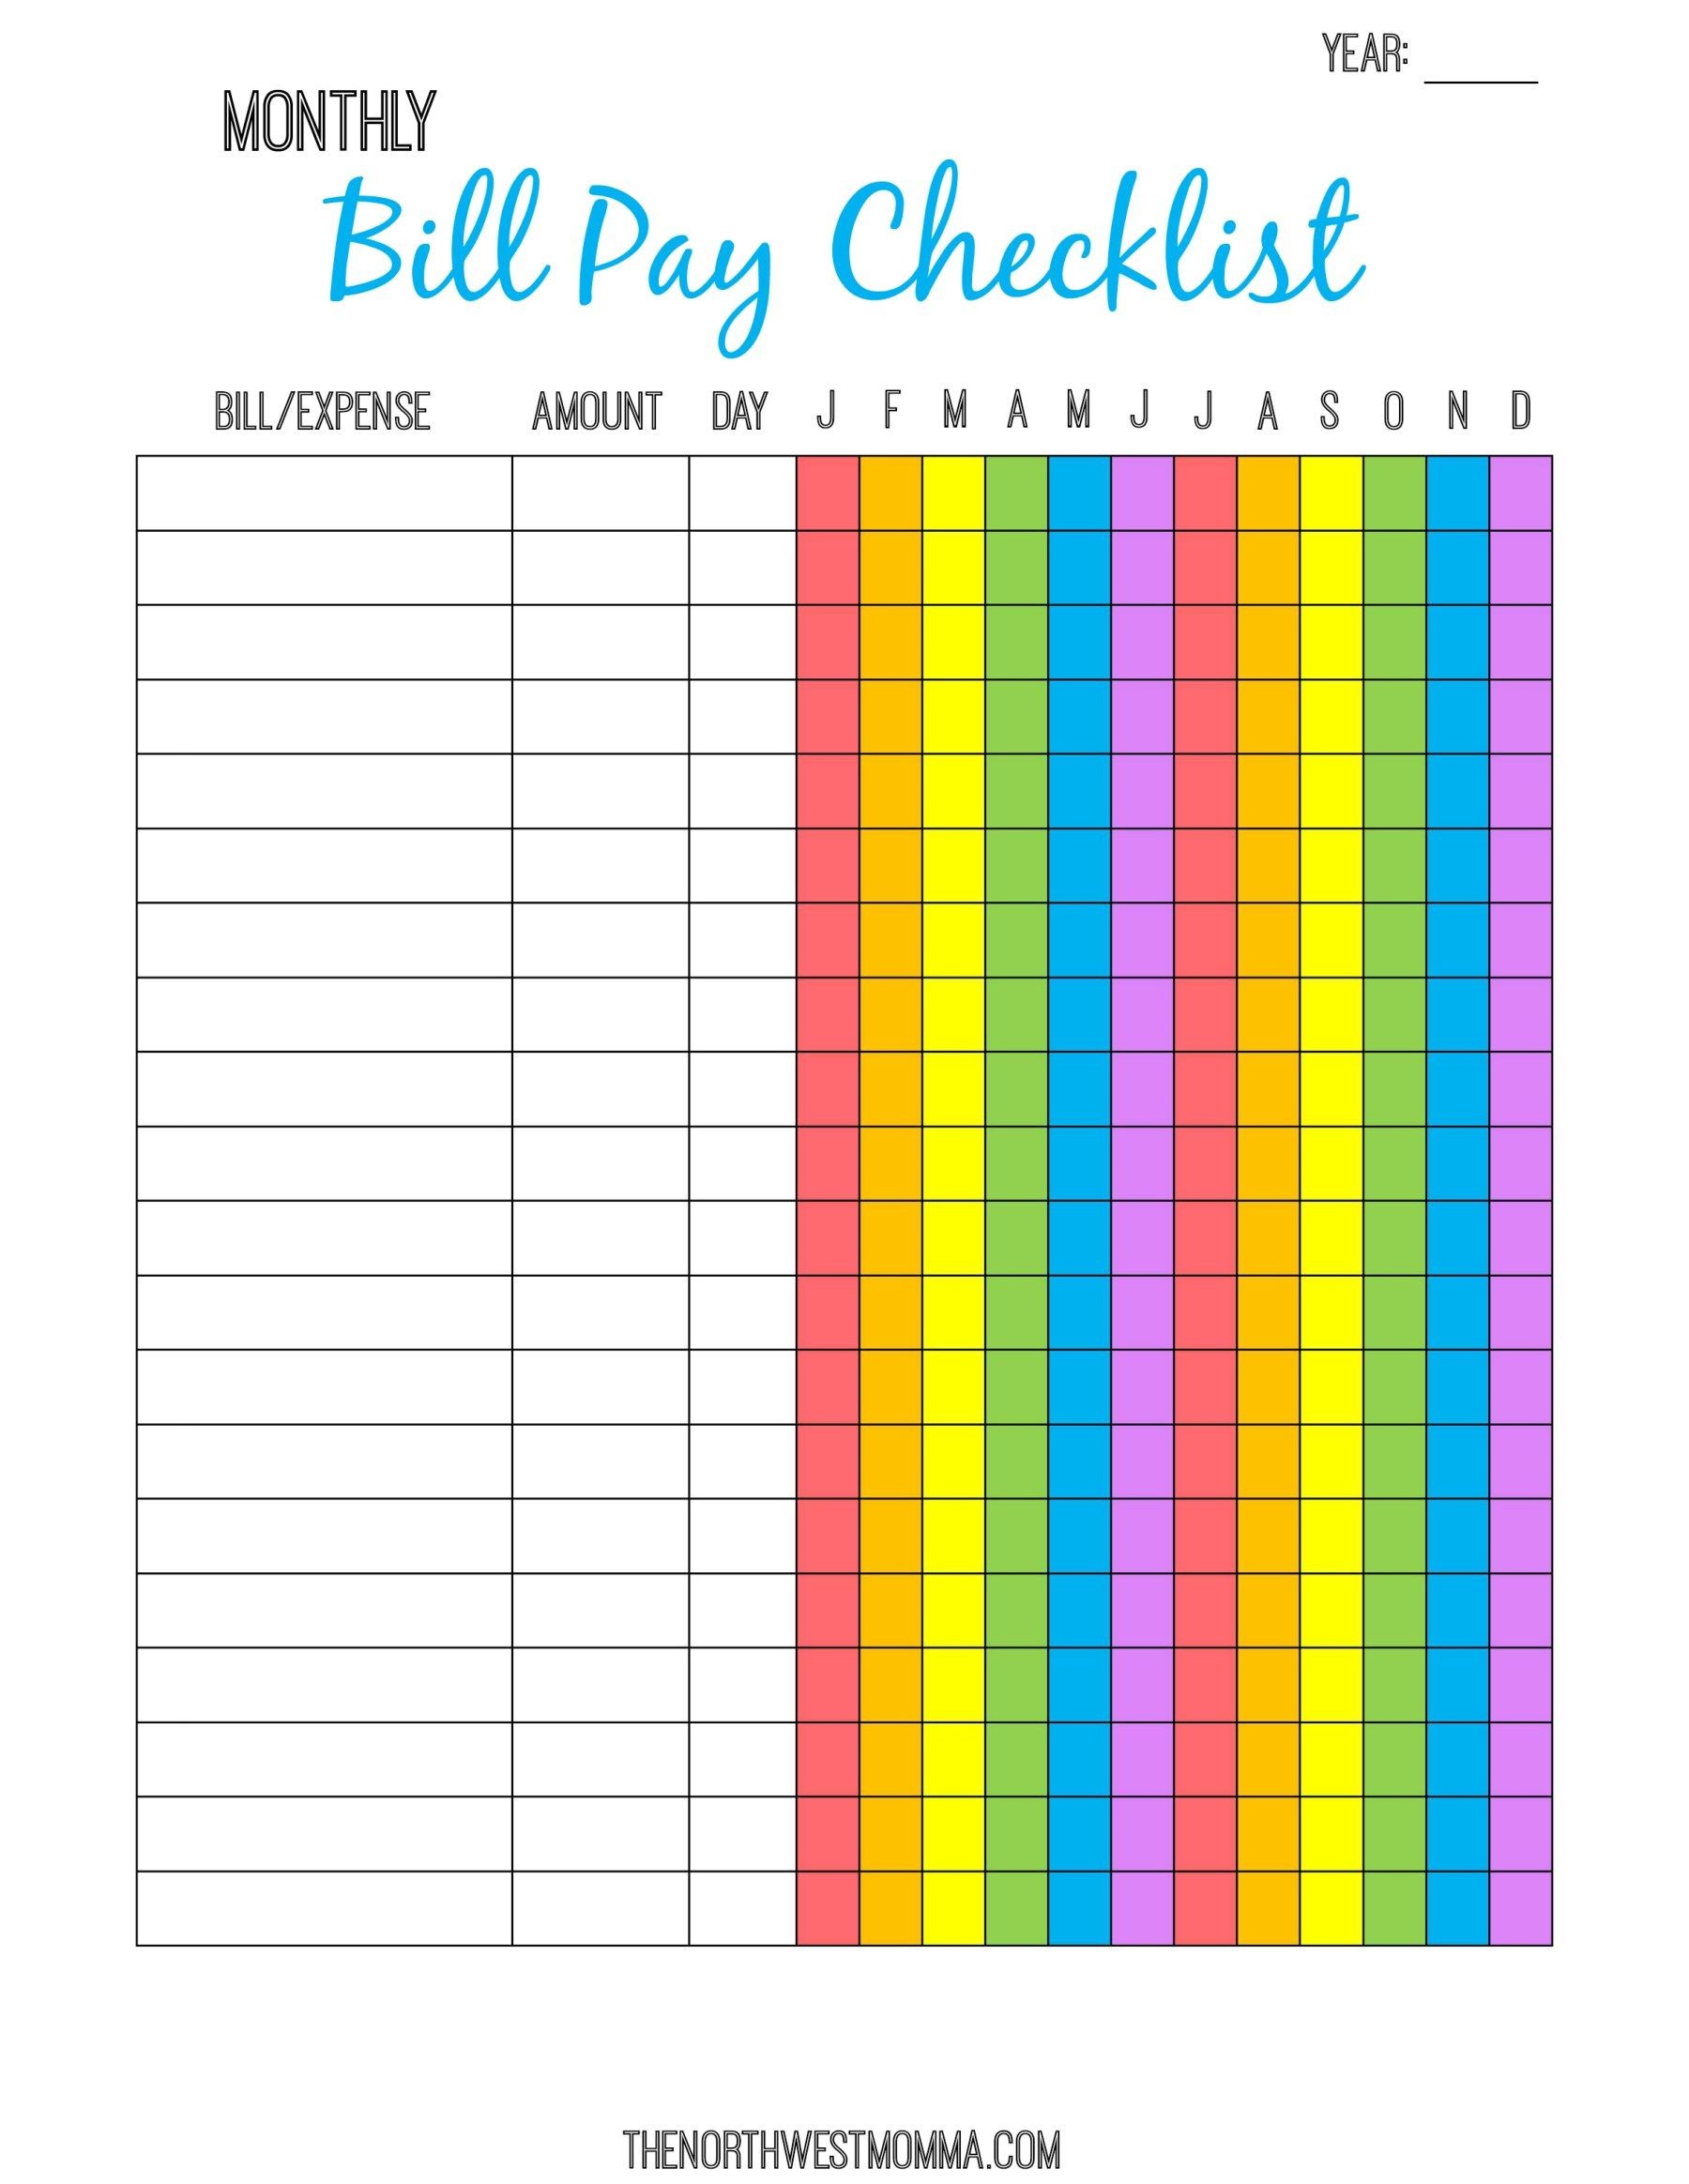 Monthly Bill Pay Checklist Free Printable Saving Money Document Paying